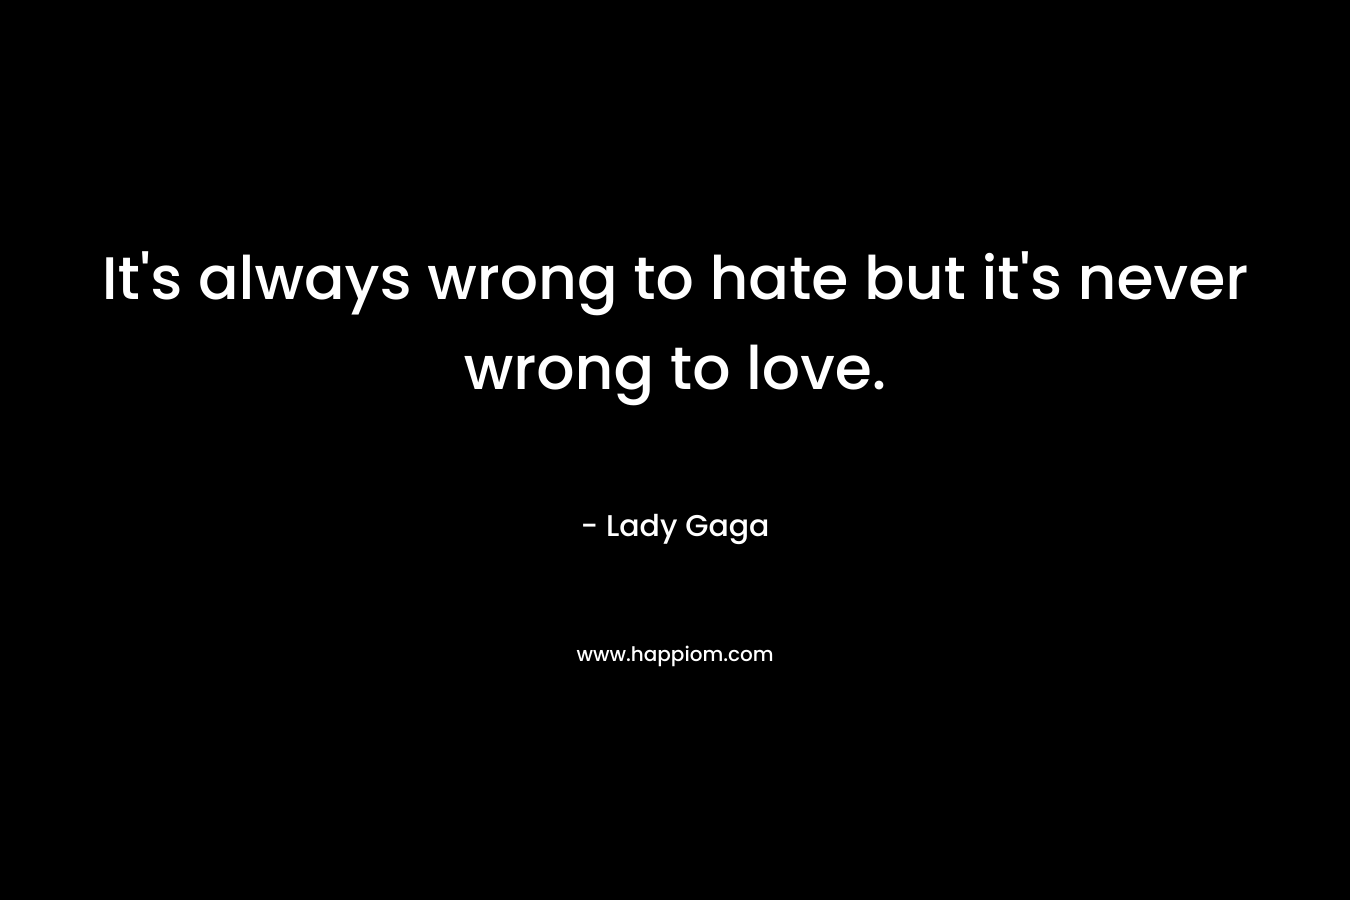 It’s always wrong to hate but it’s never wrong to love. – Lady Gaga